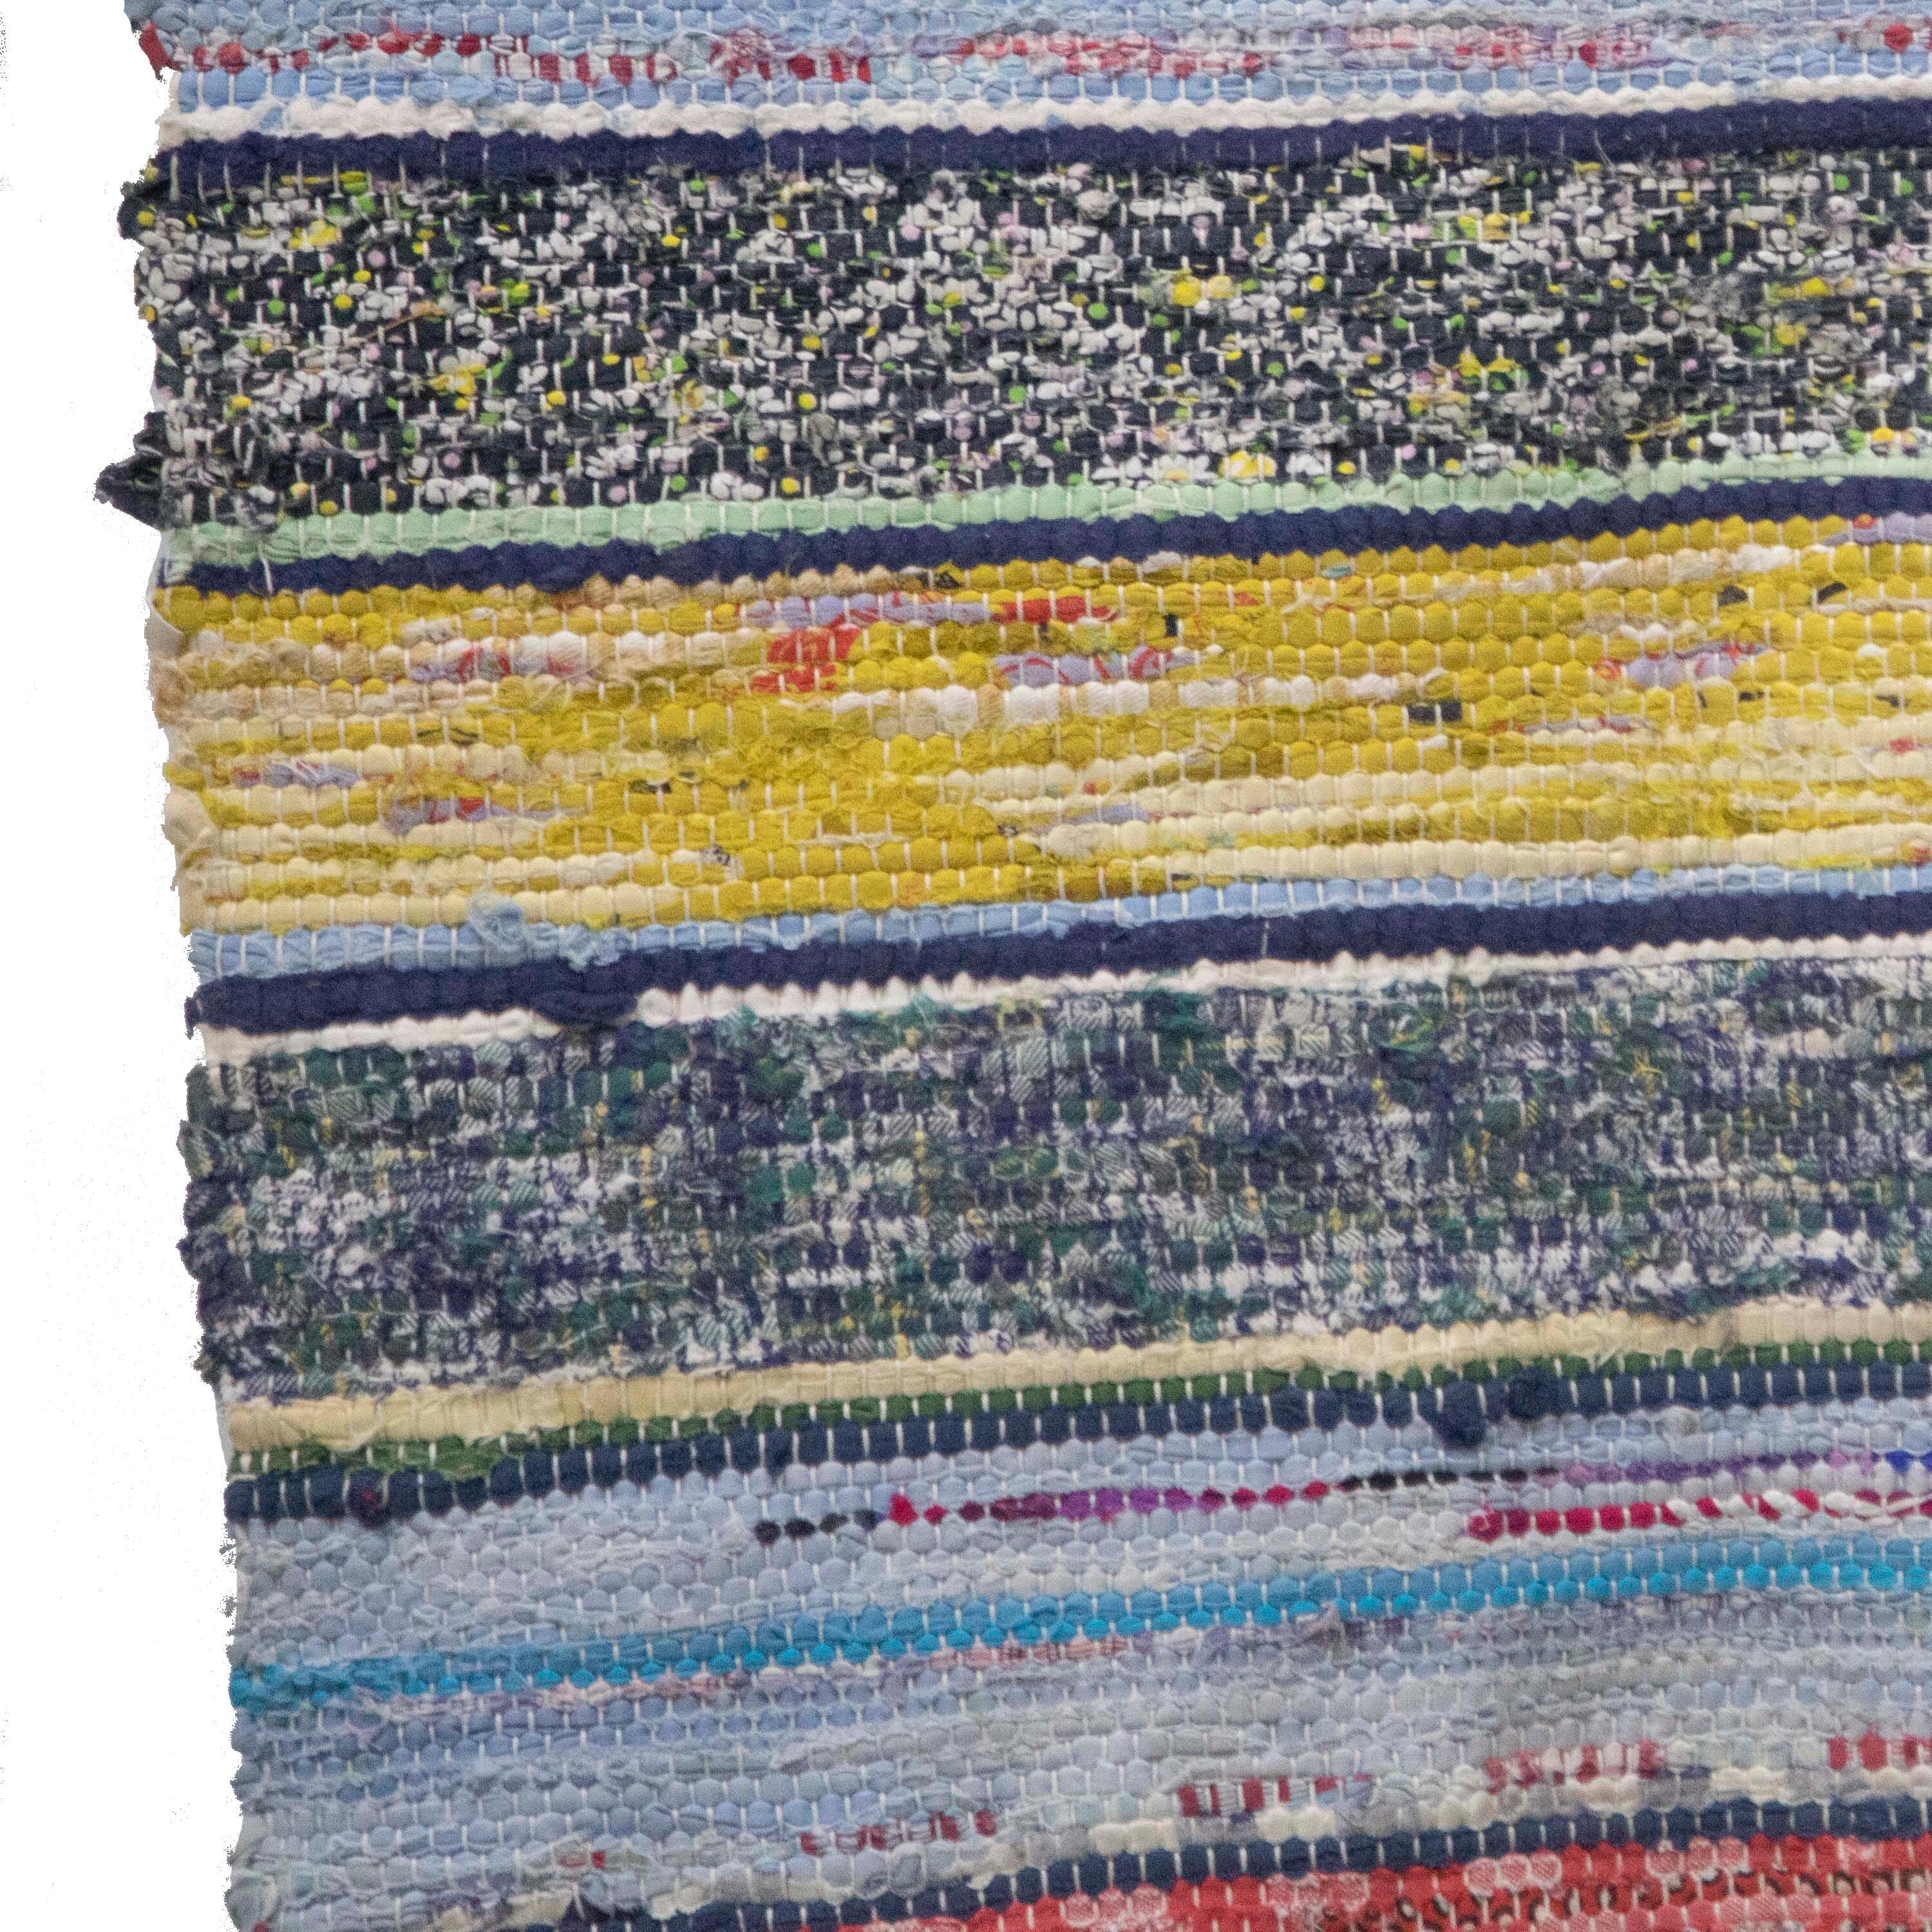 20th Century Swedish rag rug. Featuring a striped design throughout in tones of yellow, black, blue and red. This rug can be machine-washed at 30 degrees. 
RT6024583